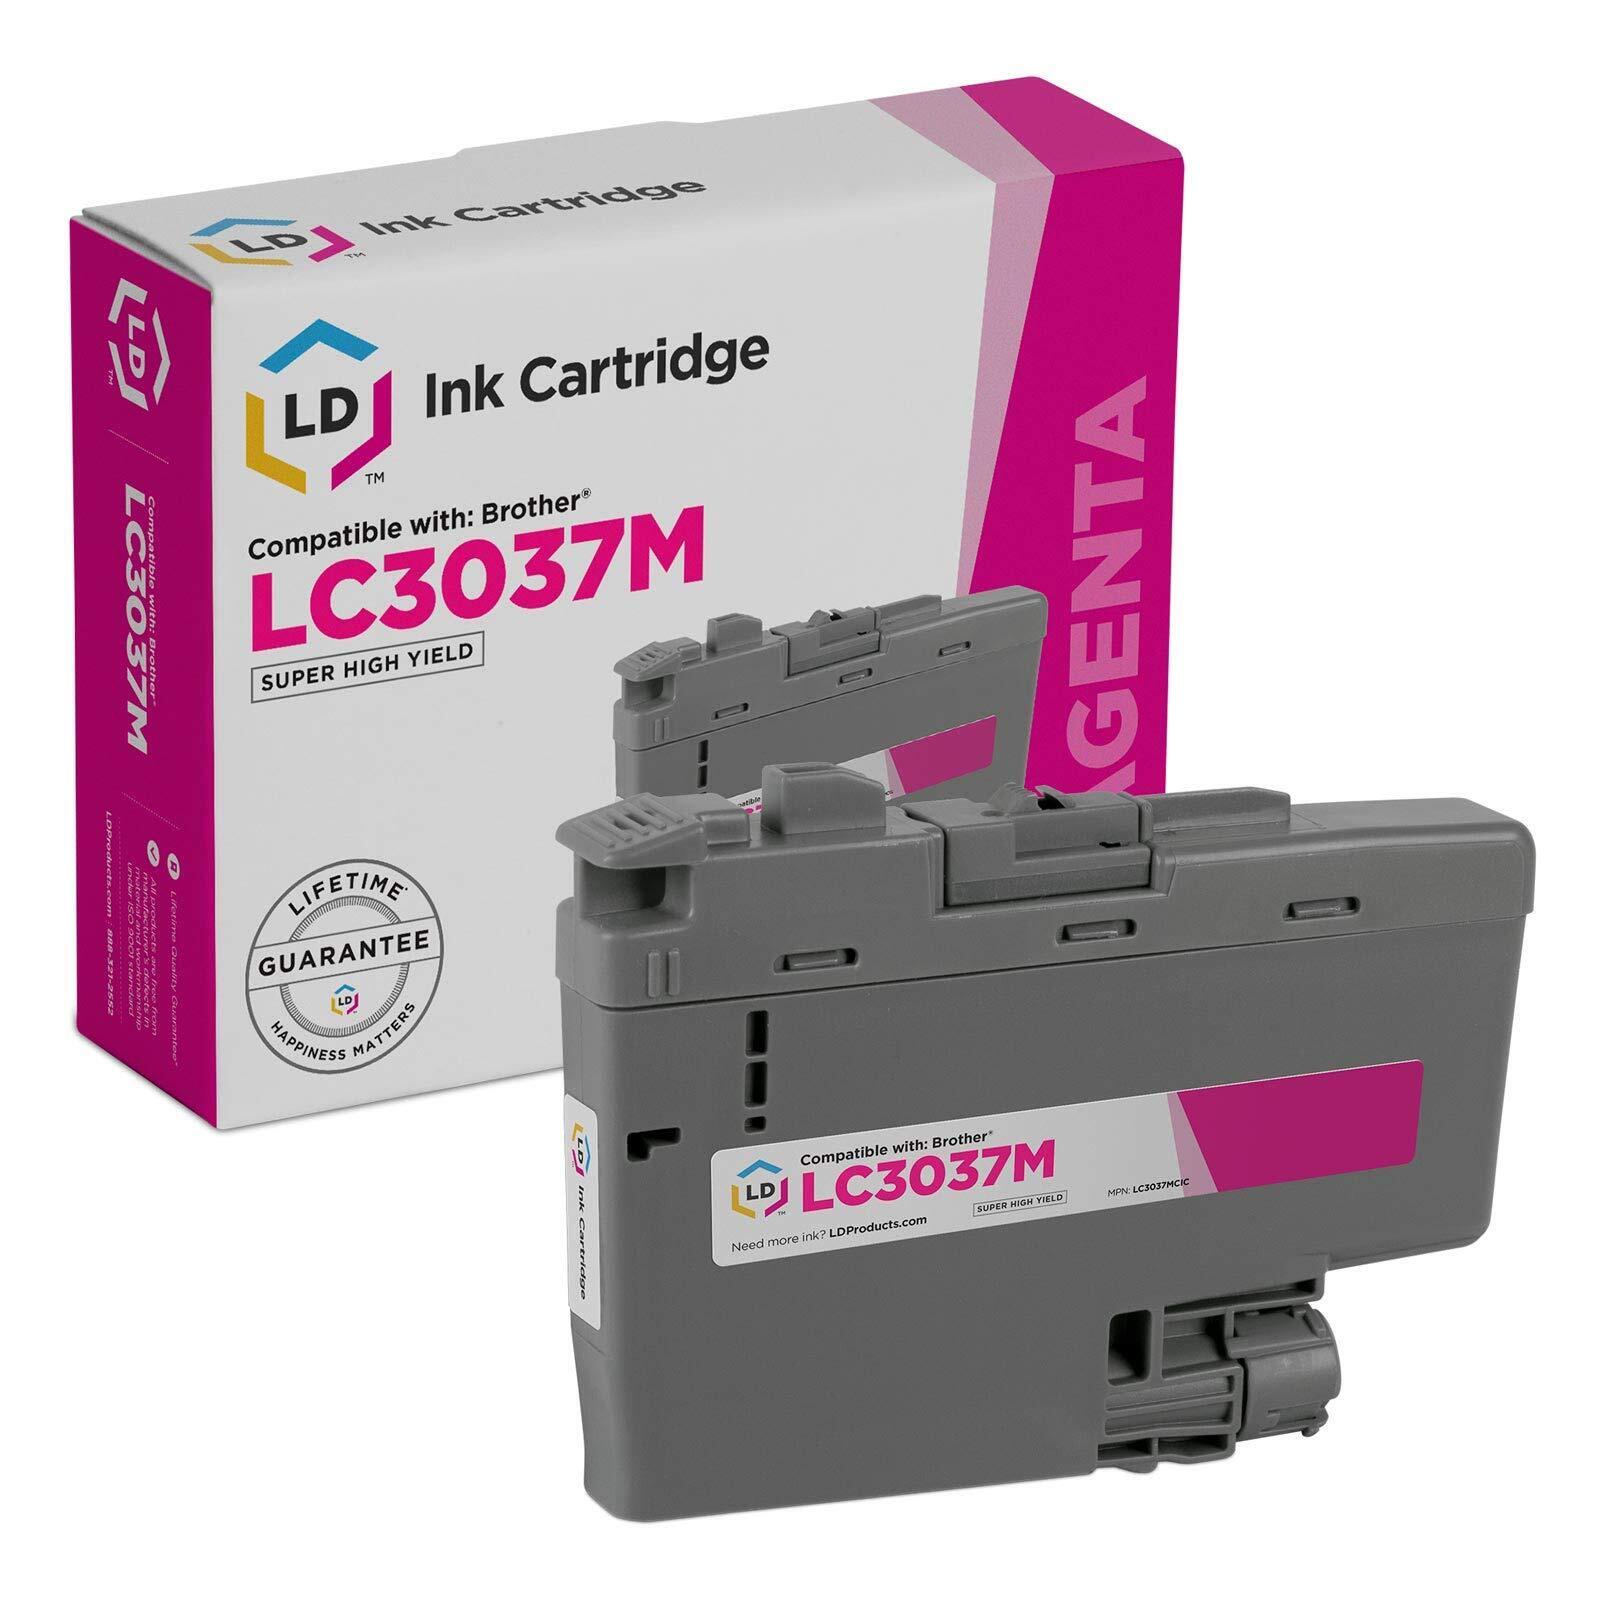 LD Compatible Brother LC3037M Super High Yield Magenta Ink Cartridge